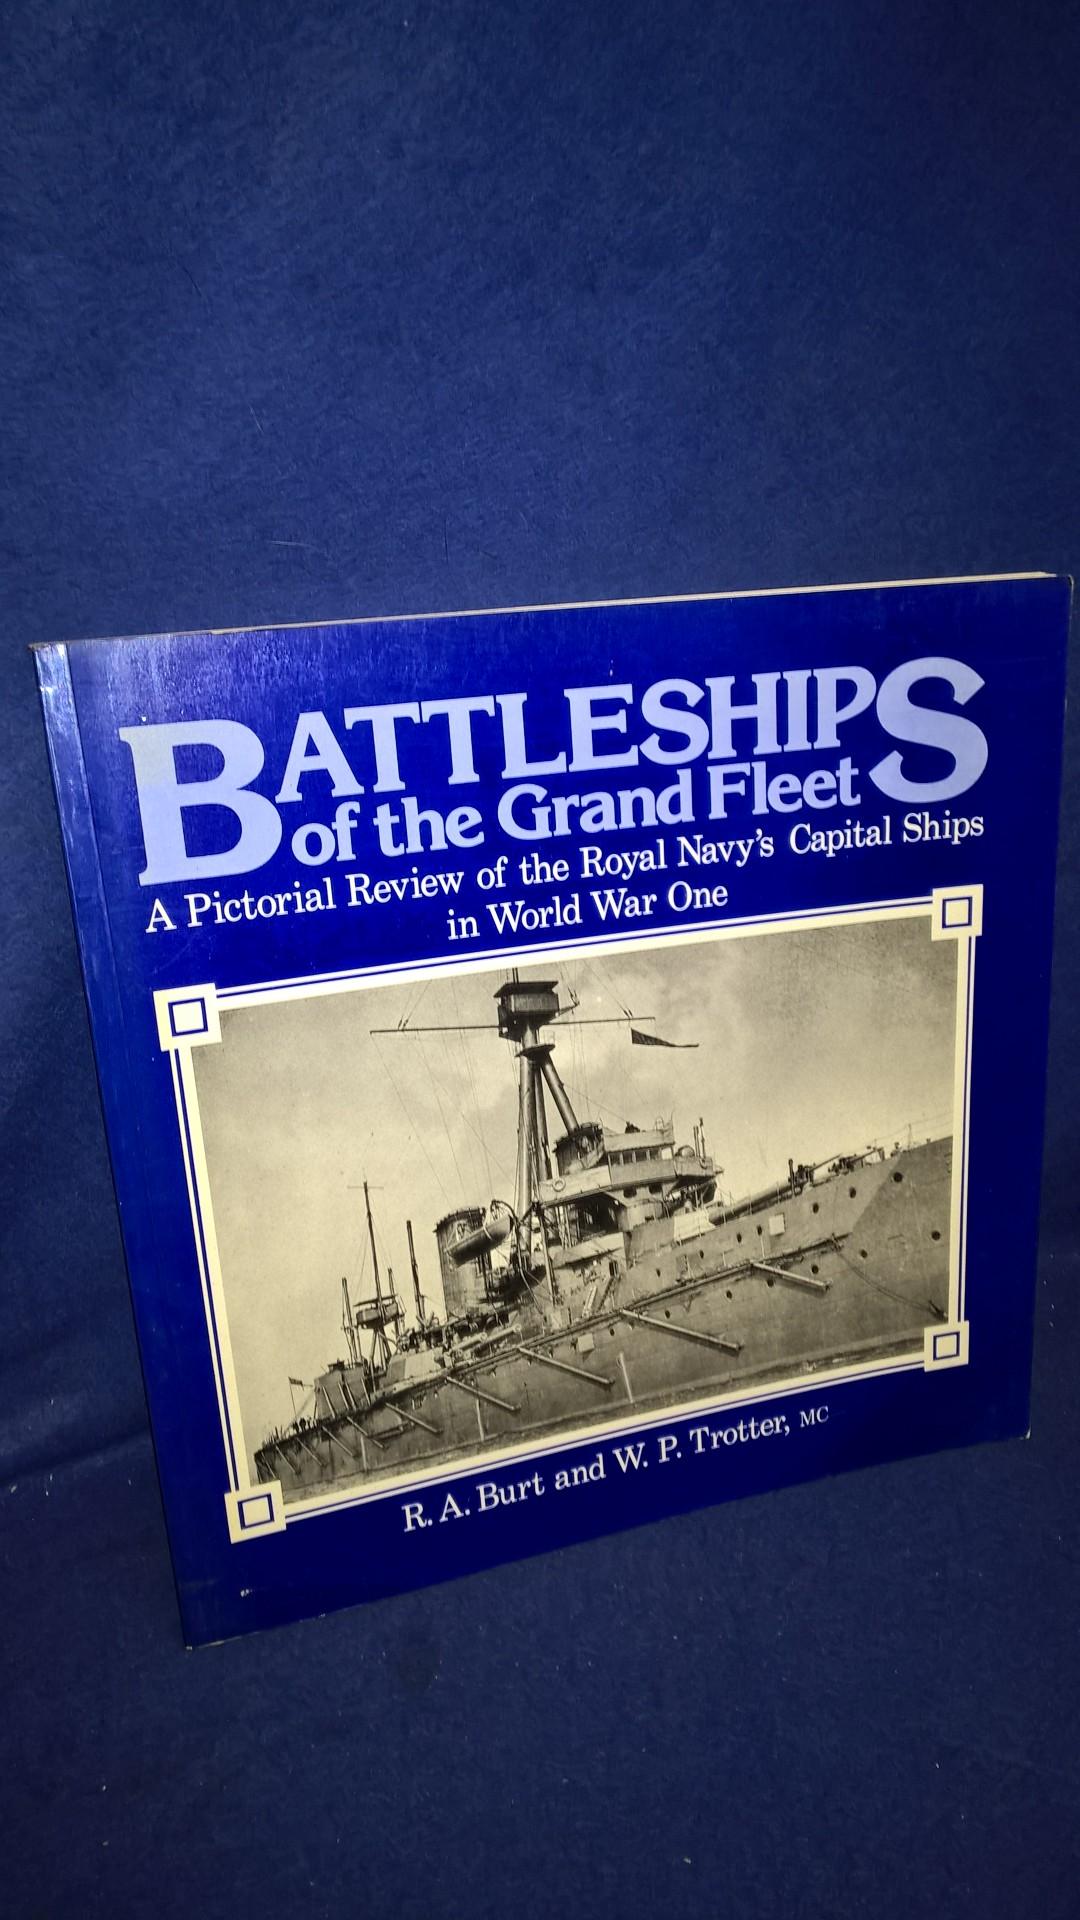 Battleships of the Grand Fleet. A Pictorial Review of the Royal Navy's Capital Ships in World War One.